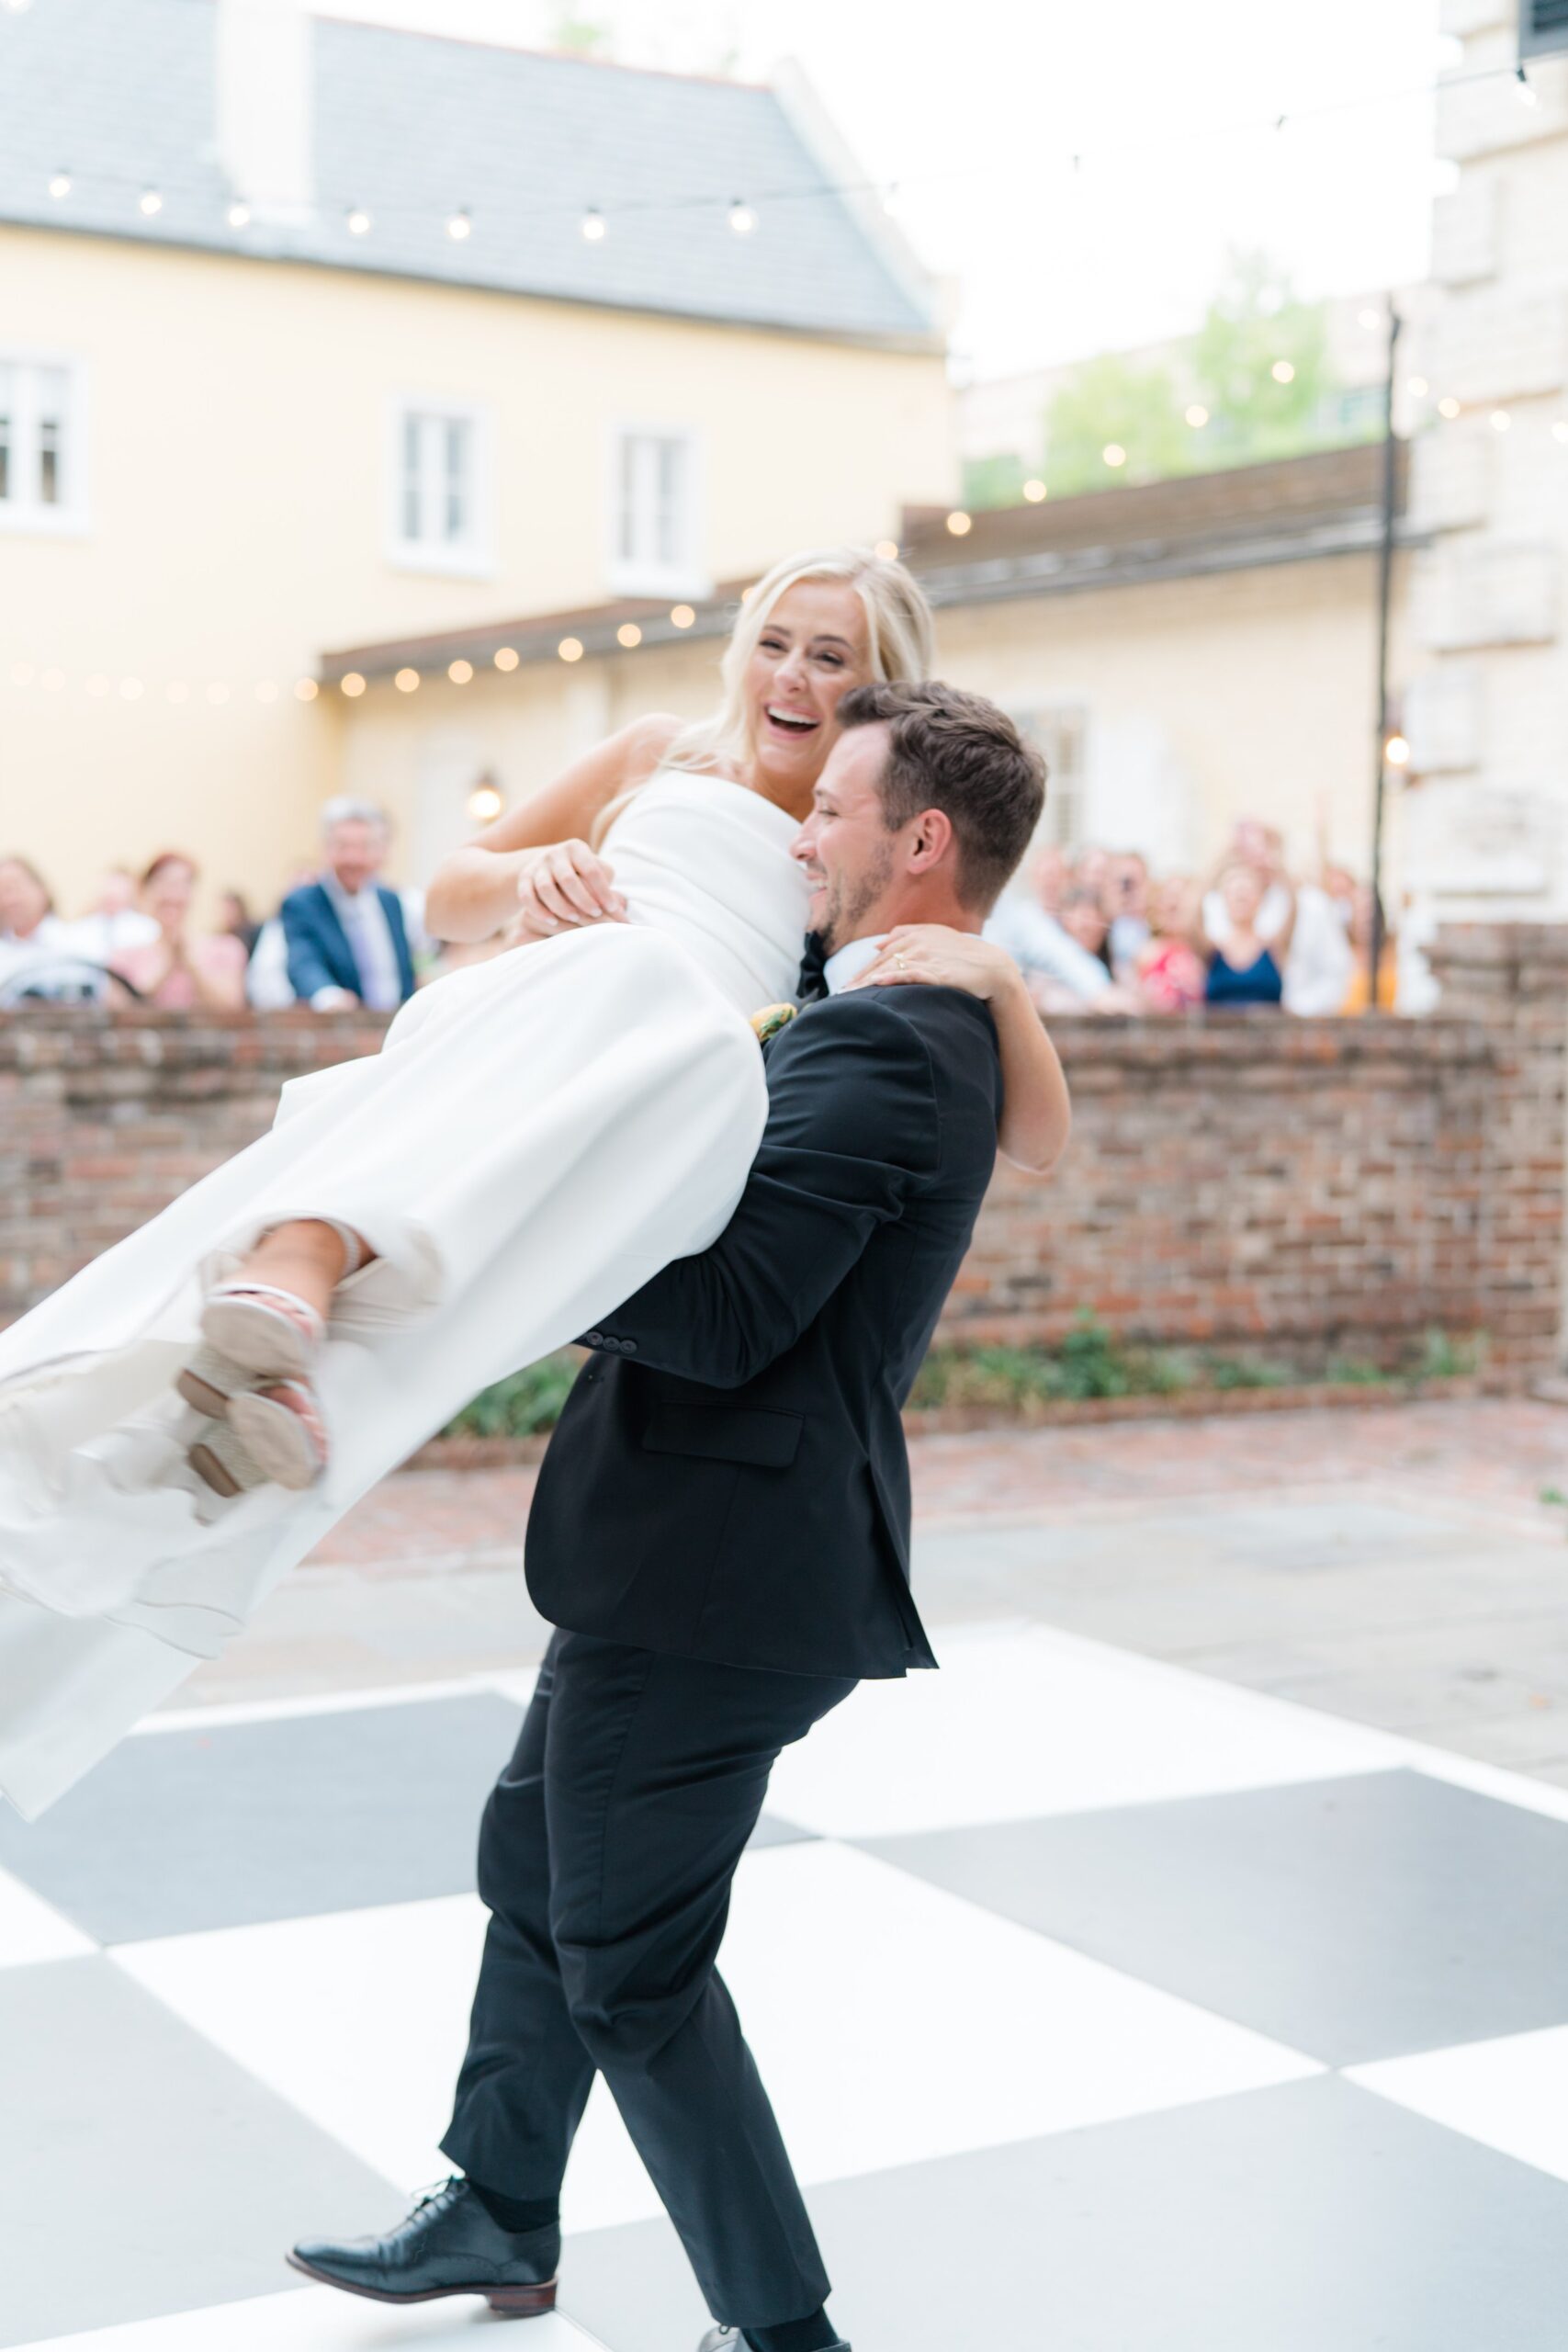 groom picks up bride during first dance and spins around.